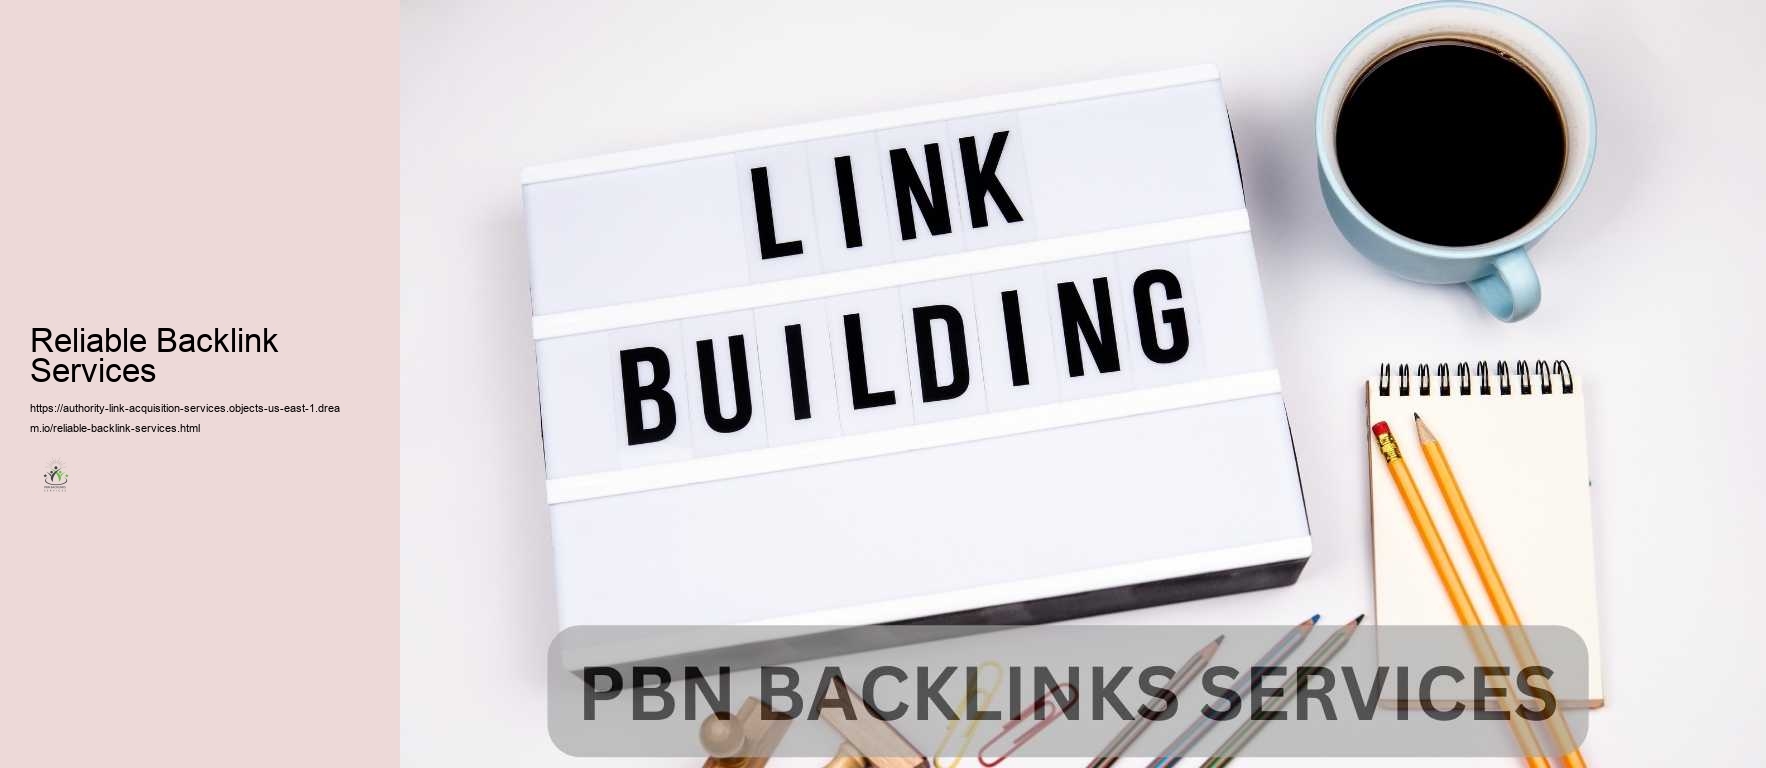 Reliable Backlink Services